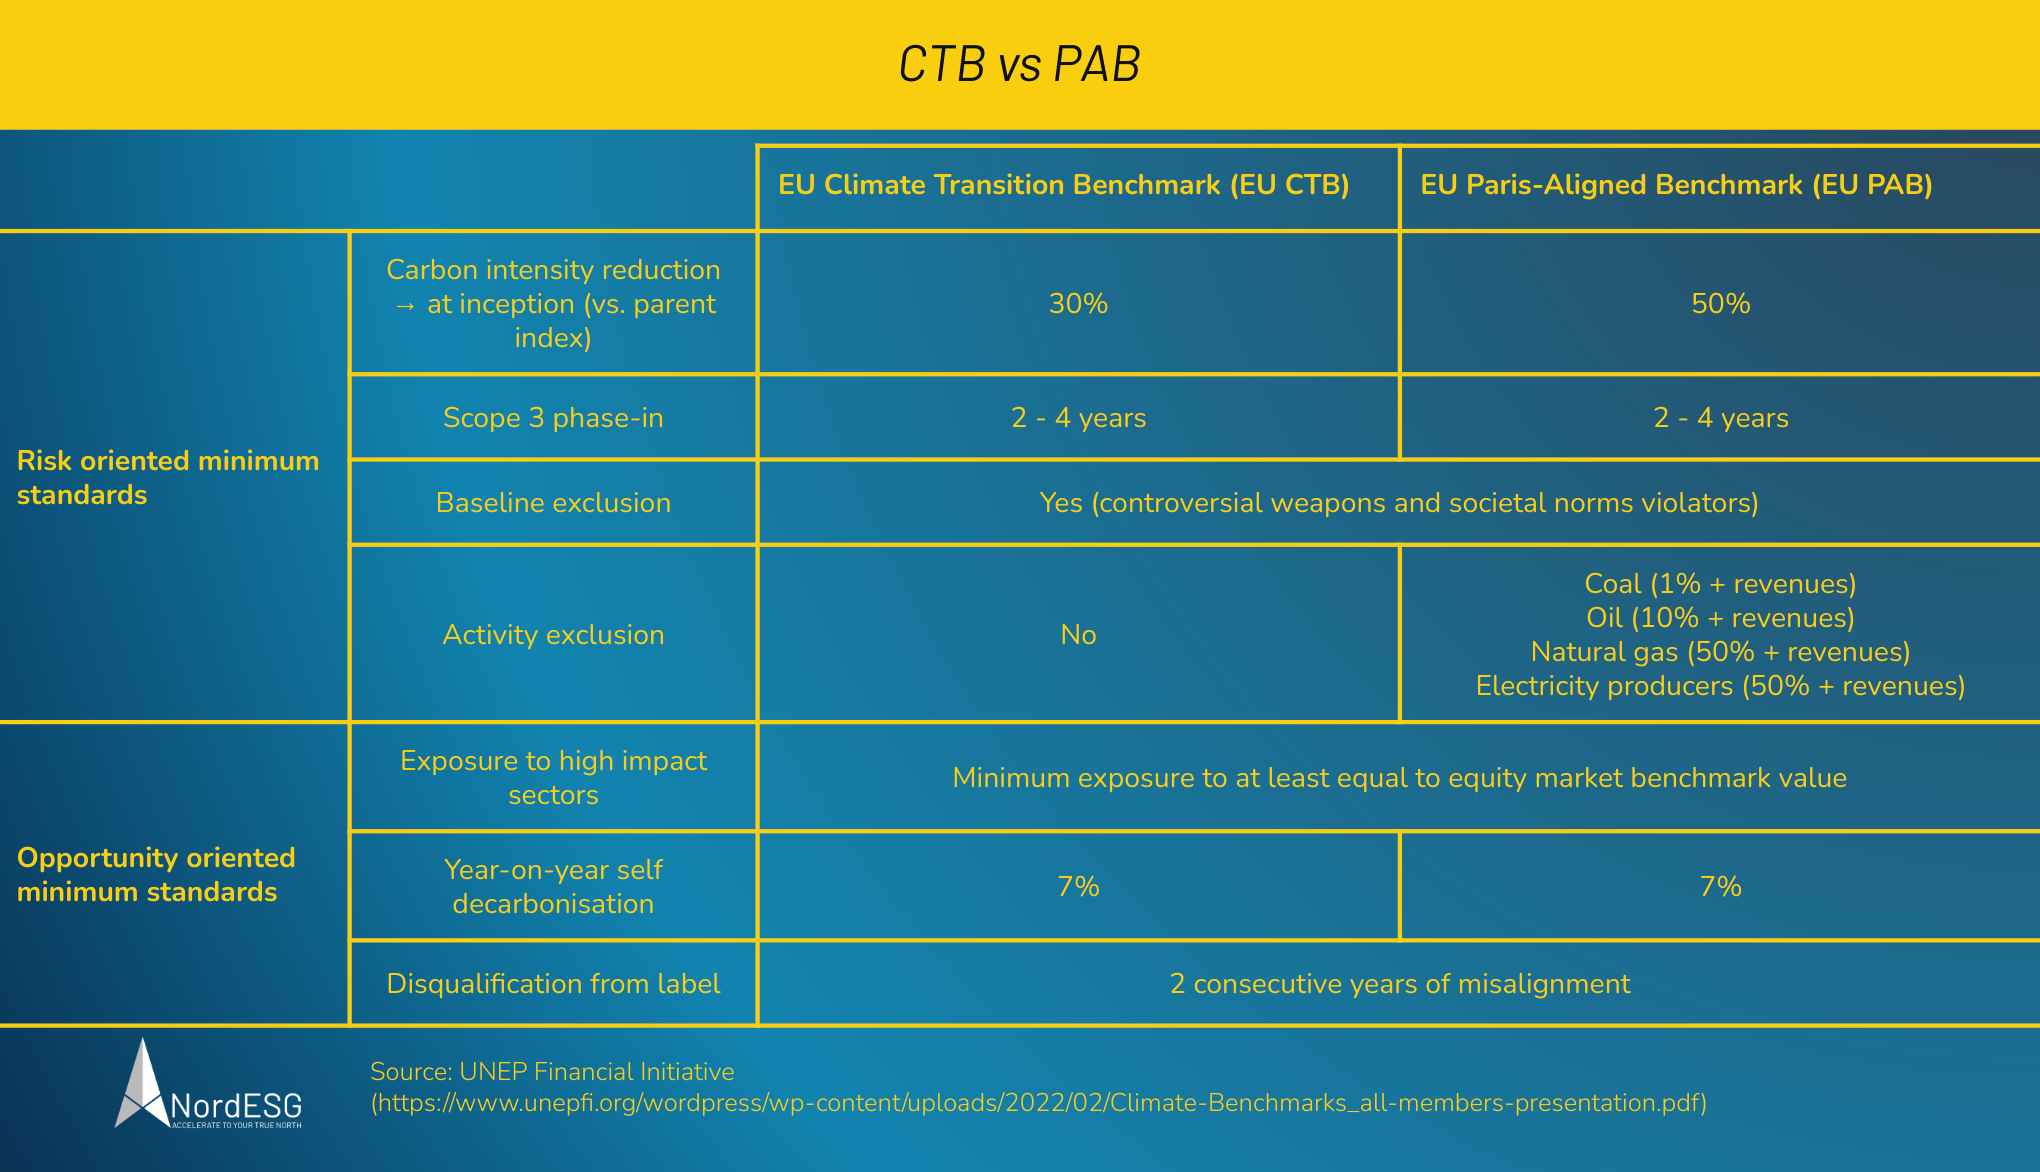 Table EU Paris-aligned Benchmarks(PABs) and Climate Transition Benchmarks(CTBs)